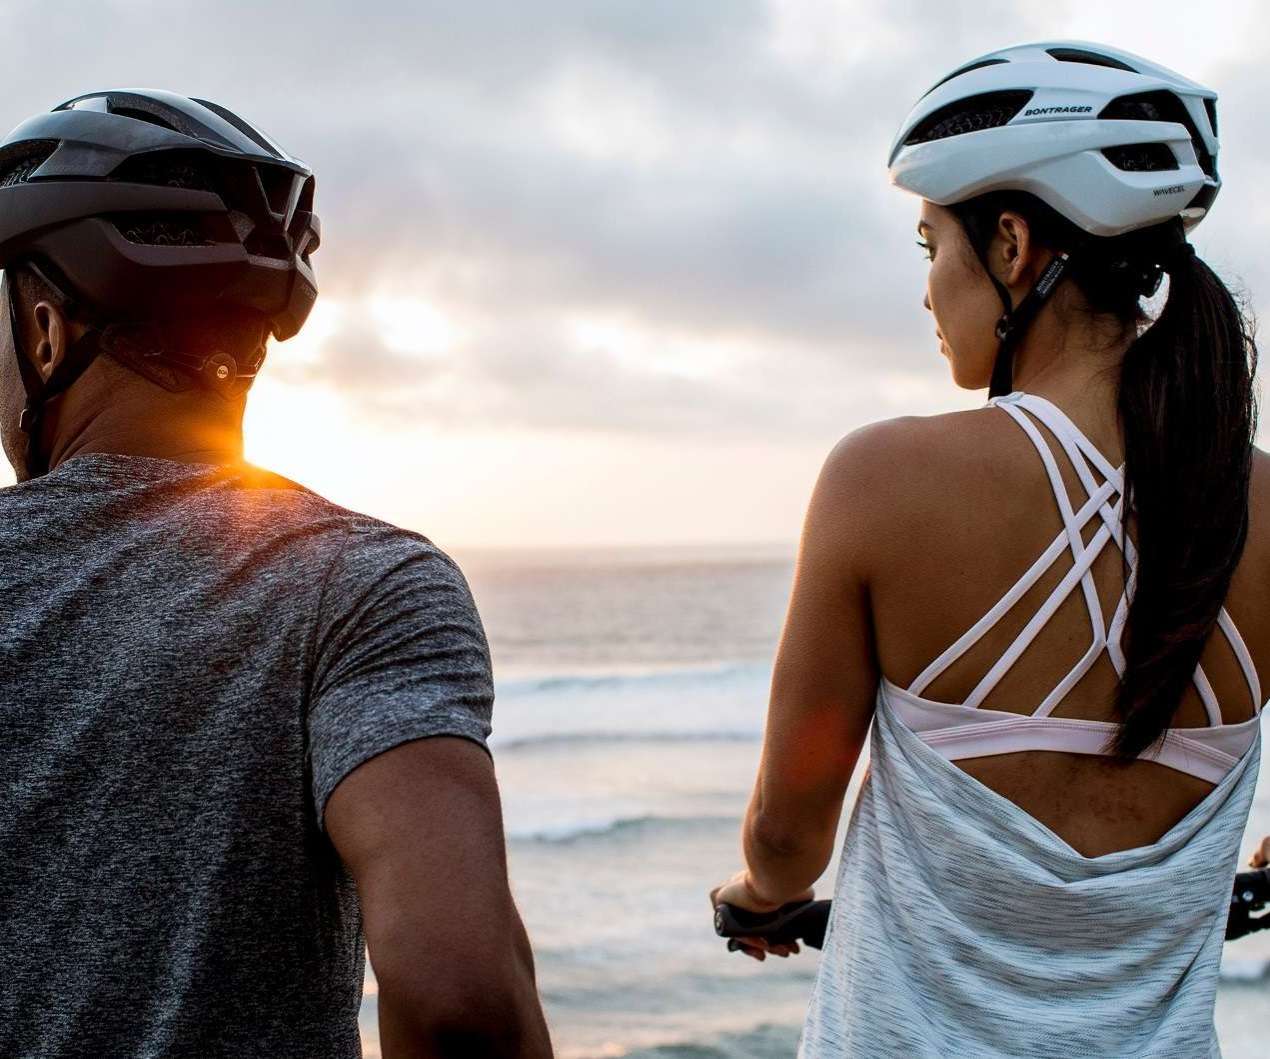 Image of two people on their hybrid bikes, by the ocean